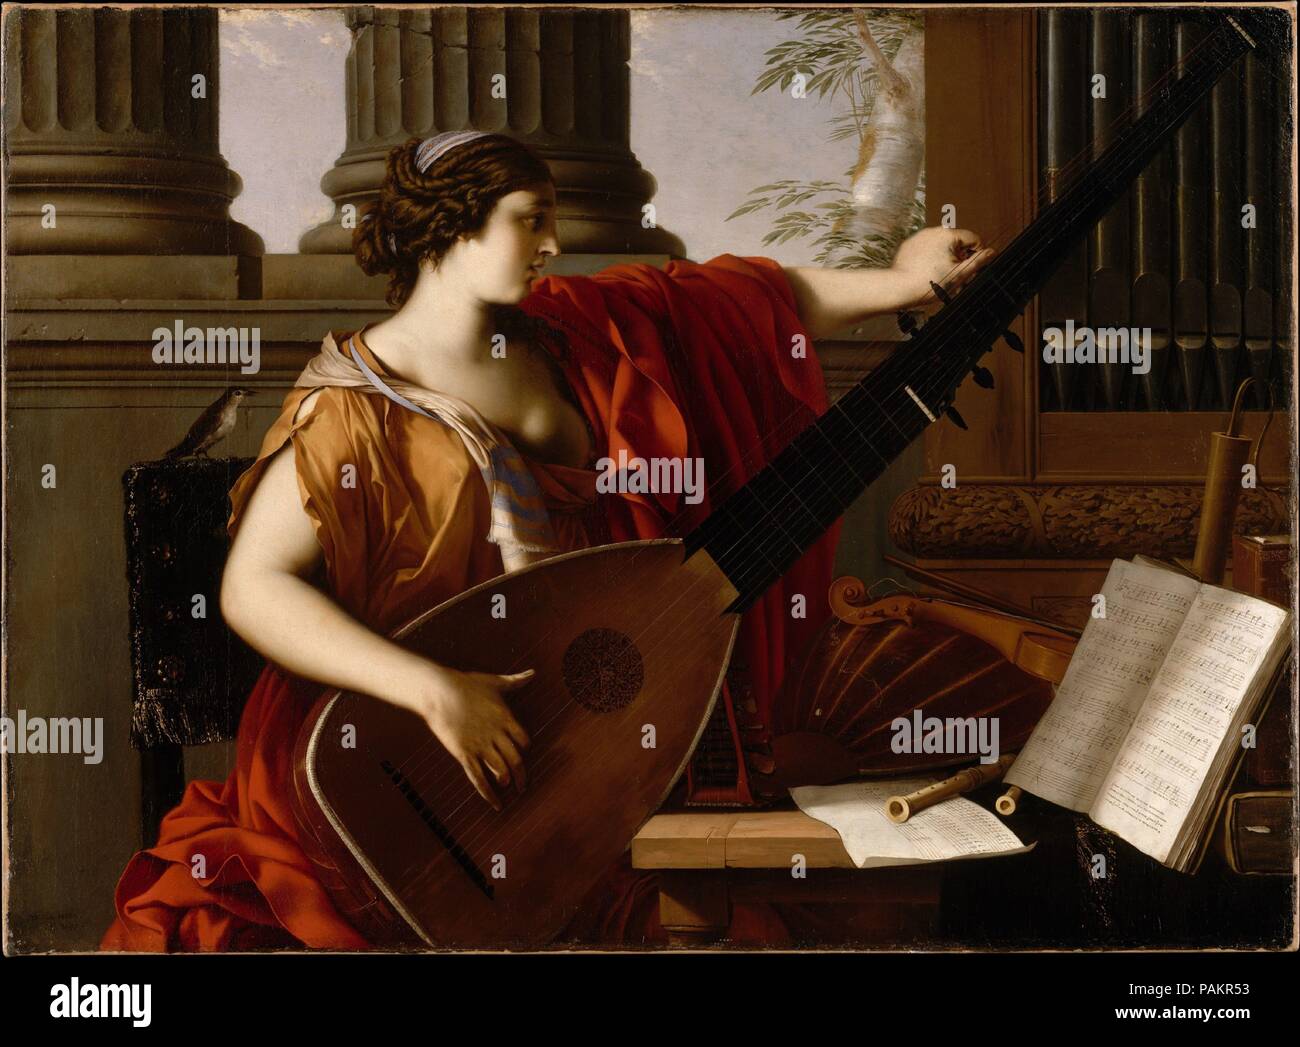 Allegory of Music. Artist: Laurent de La Hyre (French, Paris 1606-1656  Paris). Dimensions: 41 5/8 x 56 3/4 in. (105.7 x 144.1 cm). Date: 1649. The  allegorical figure tunes a theorbo. At